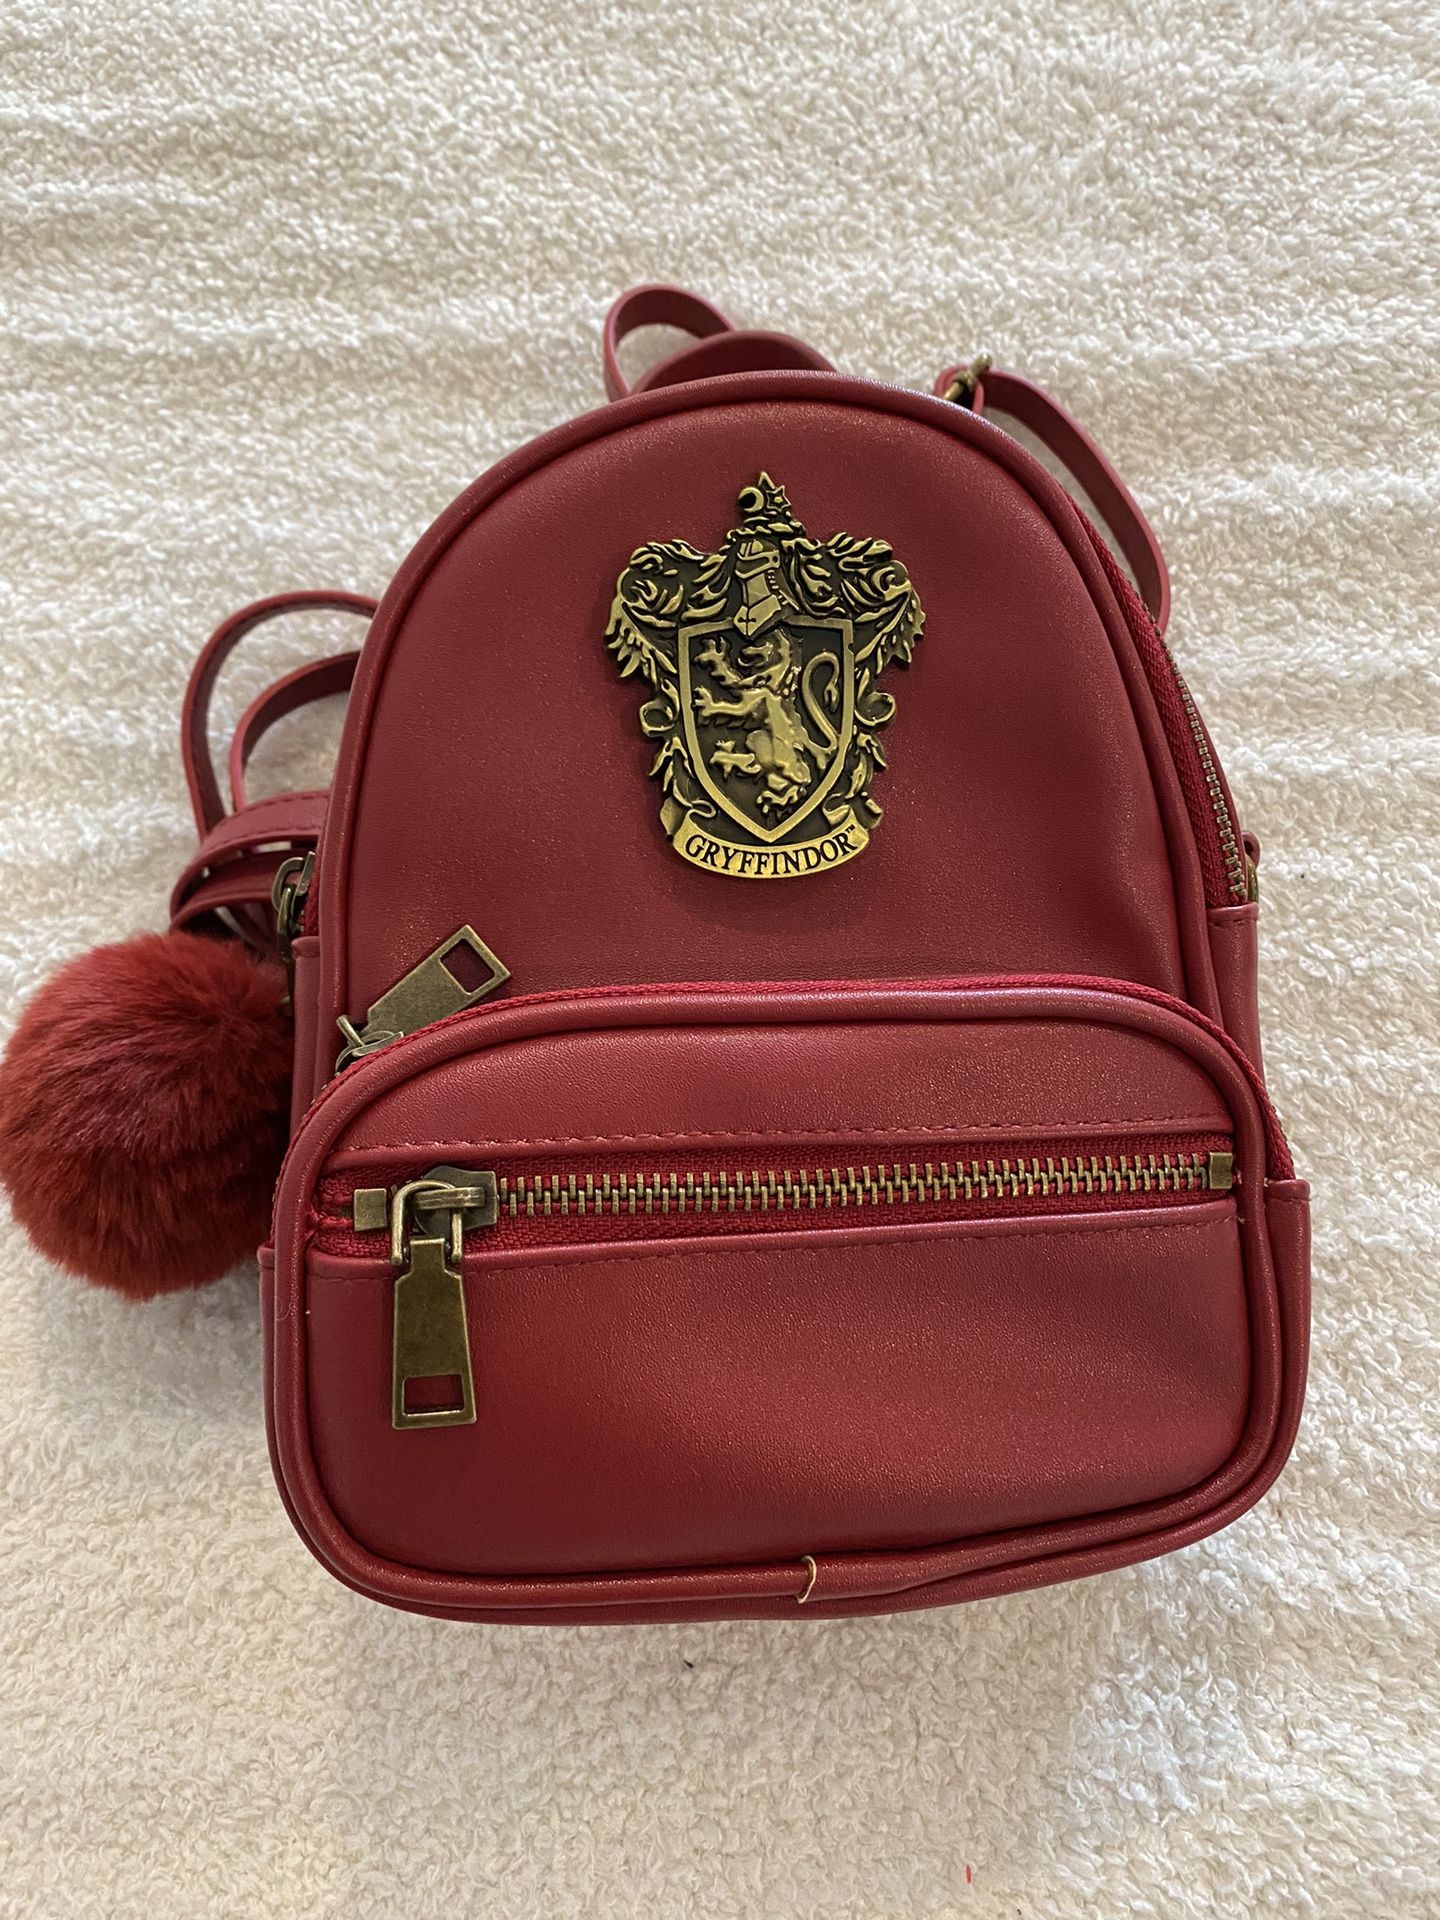 Collectible Harry Potter Mini Backpack 